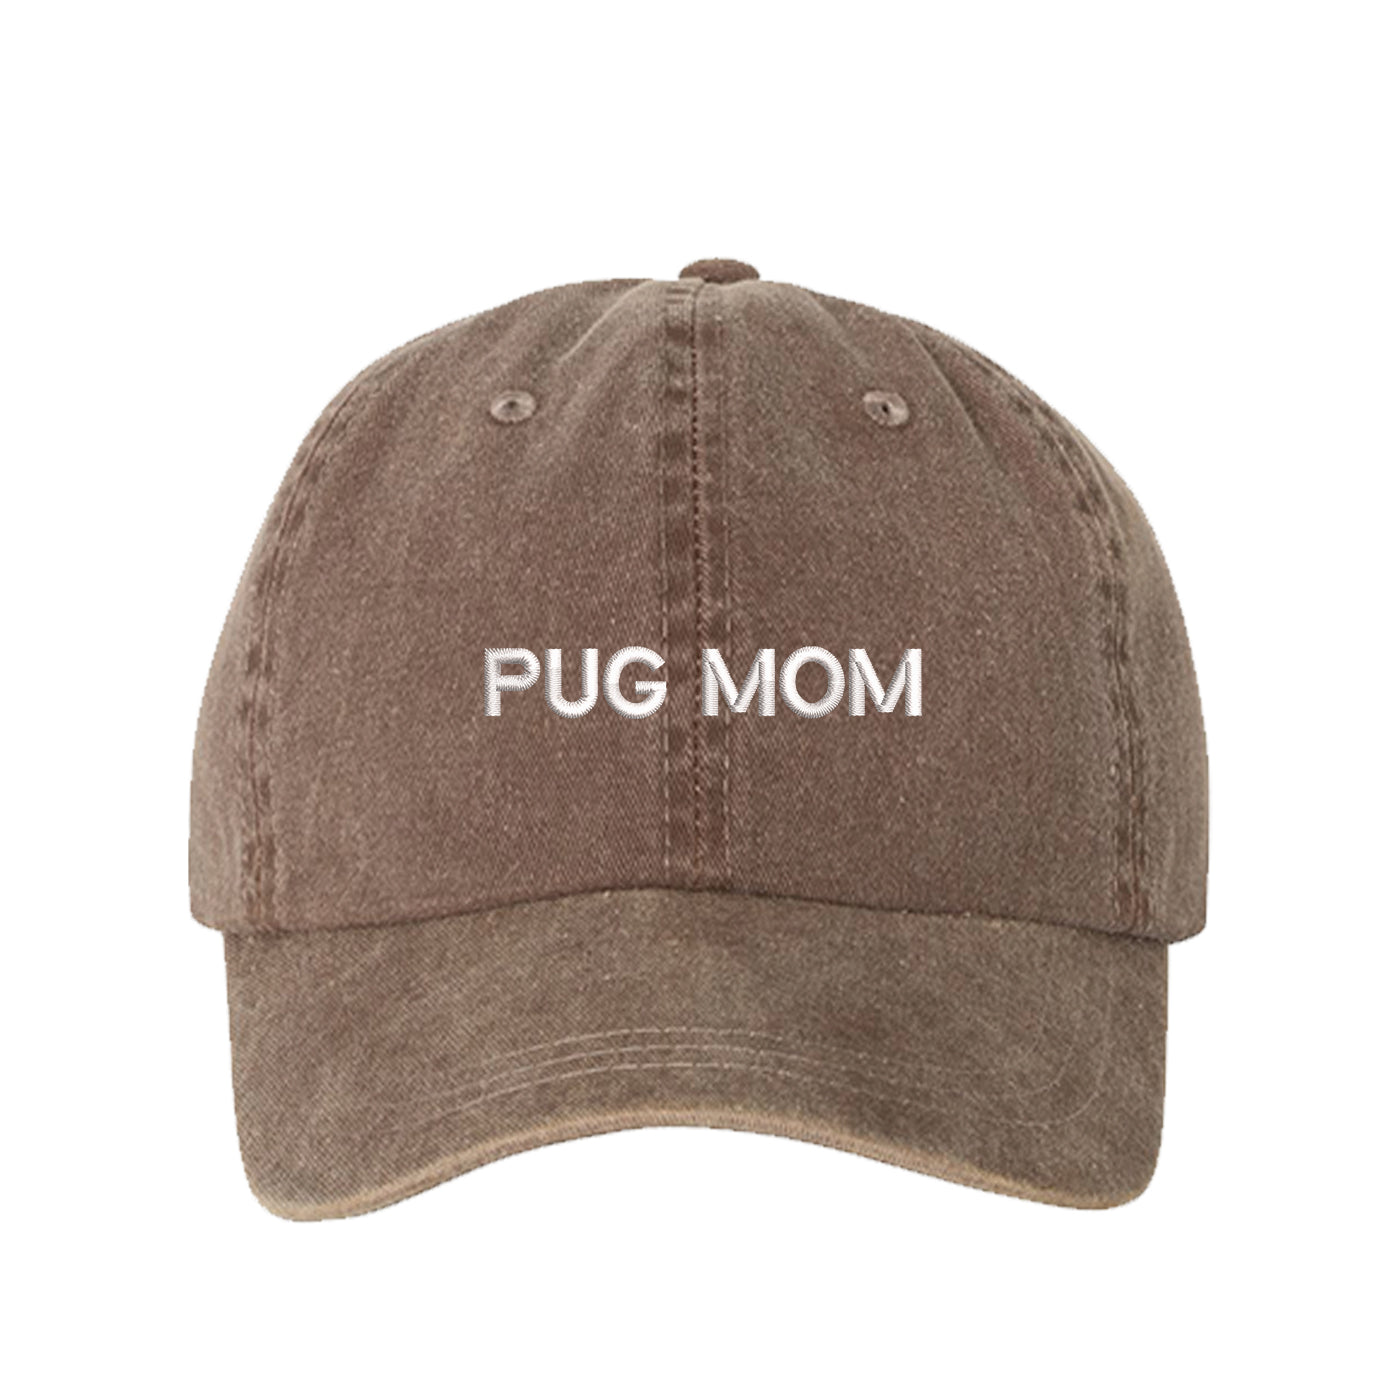 Pug Mom Washed Baseball Hat, Pug Mom Dad Hat, Dog Parent Hats, Embroidered Dad hat, Animal Lover Gifts, Pug Mother, Mothers Day Gift, Pug Mama, DSY Lifestyle Dad Hats, Chocolate Washed Baseball Hat